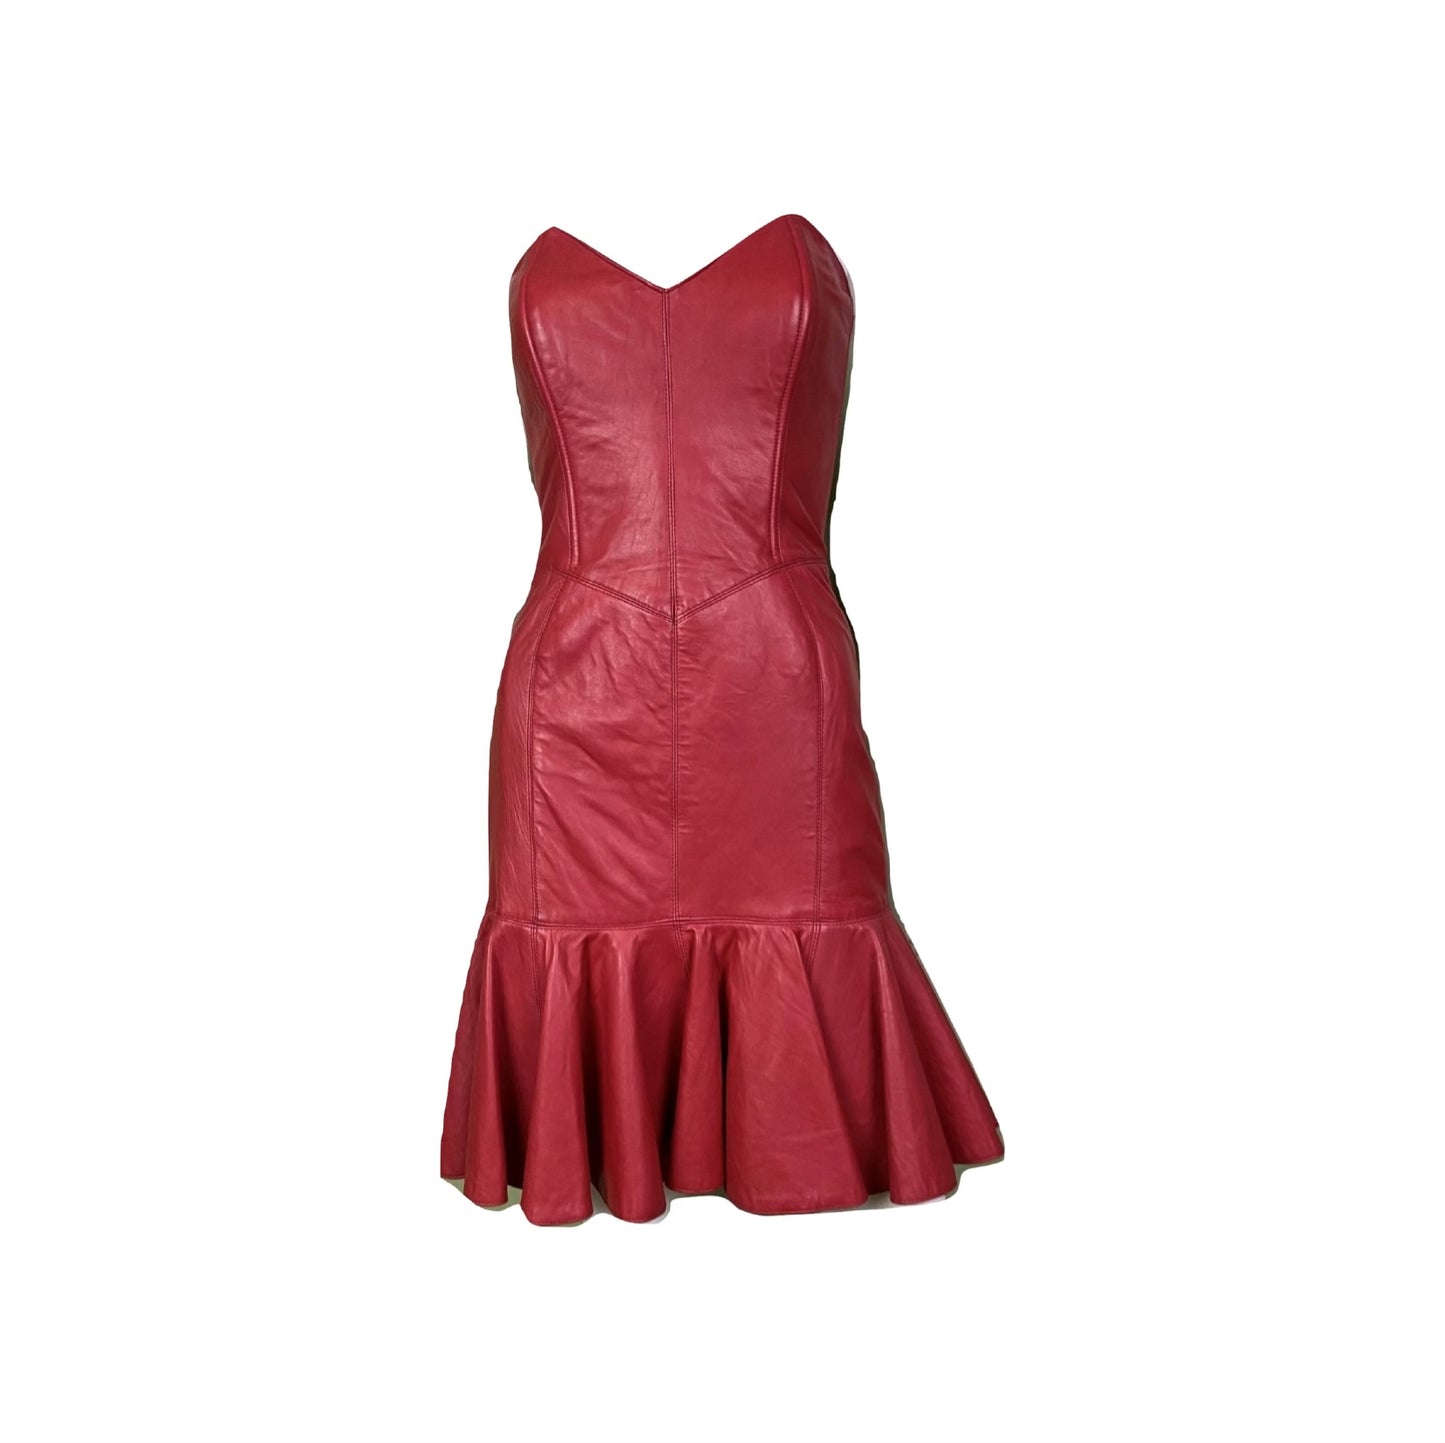 [SOLD] Vintage Michael Hoban Red Leather Bustier Ruffle Mini Dress